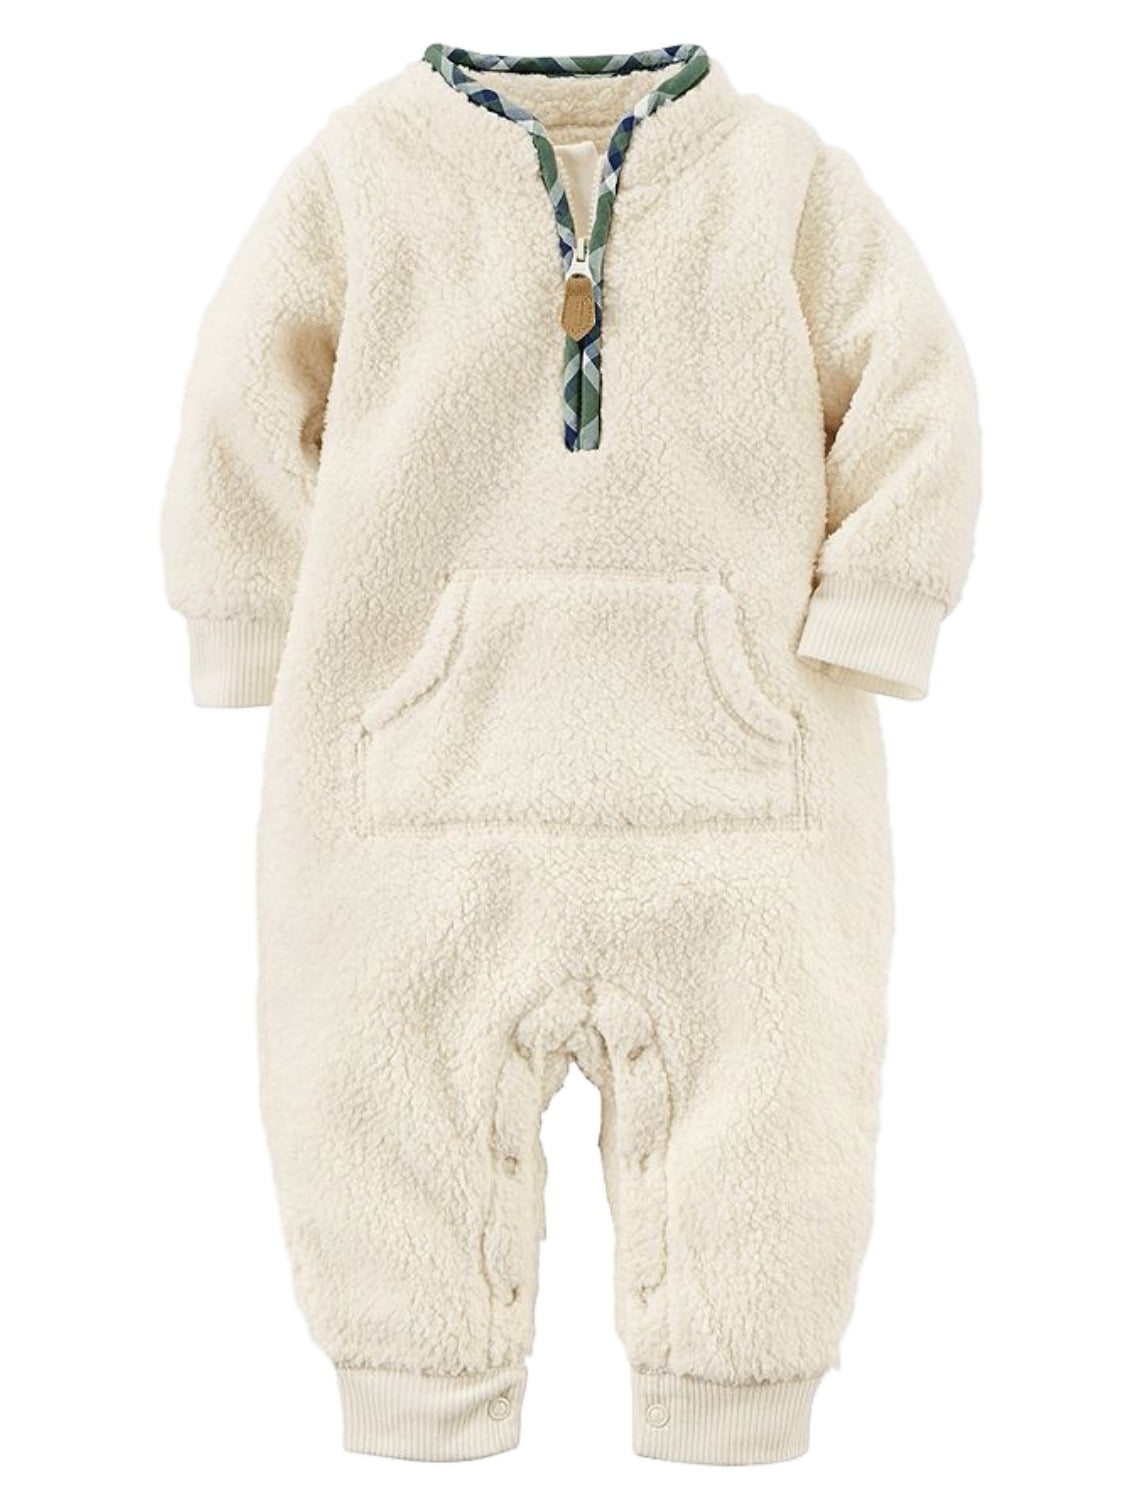 Carters Baby Boys Layered-Look Jumpsuit